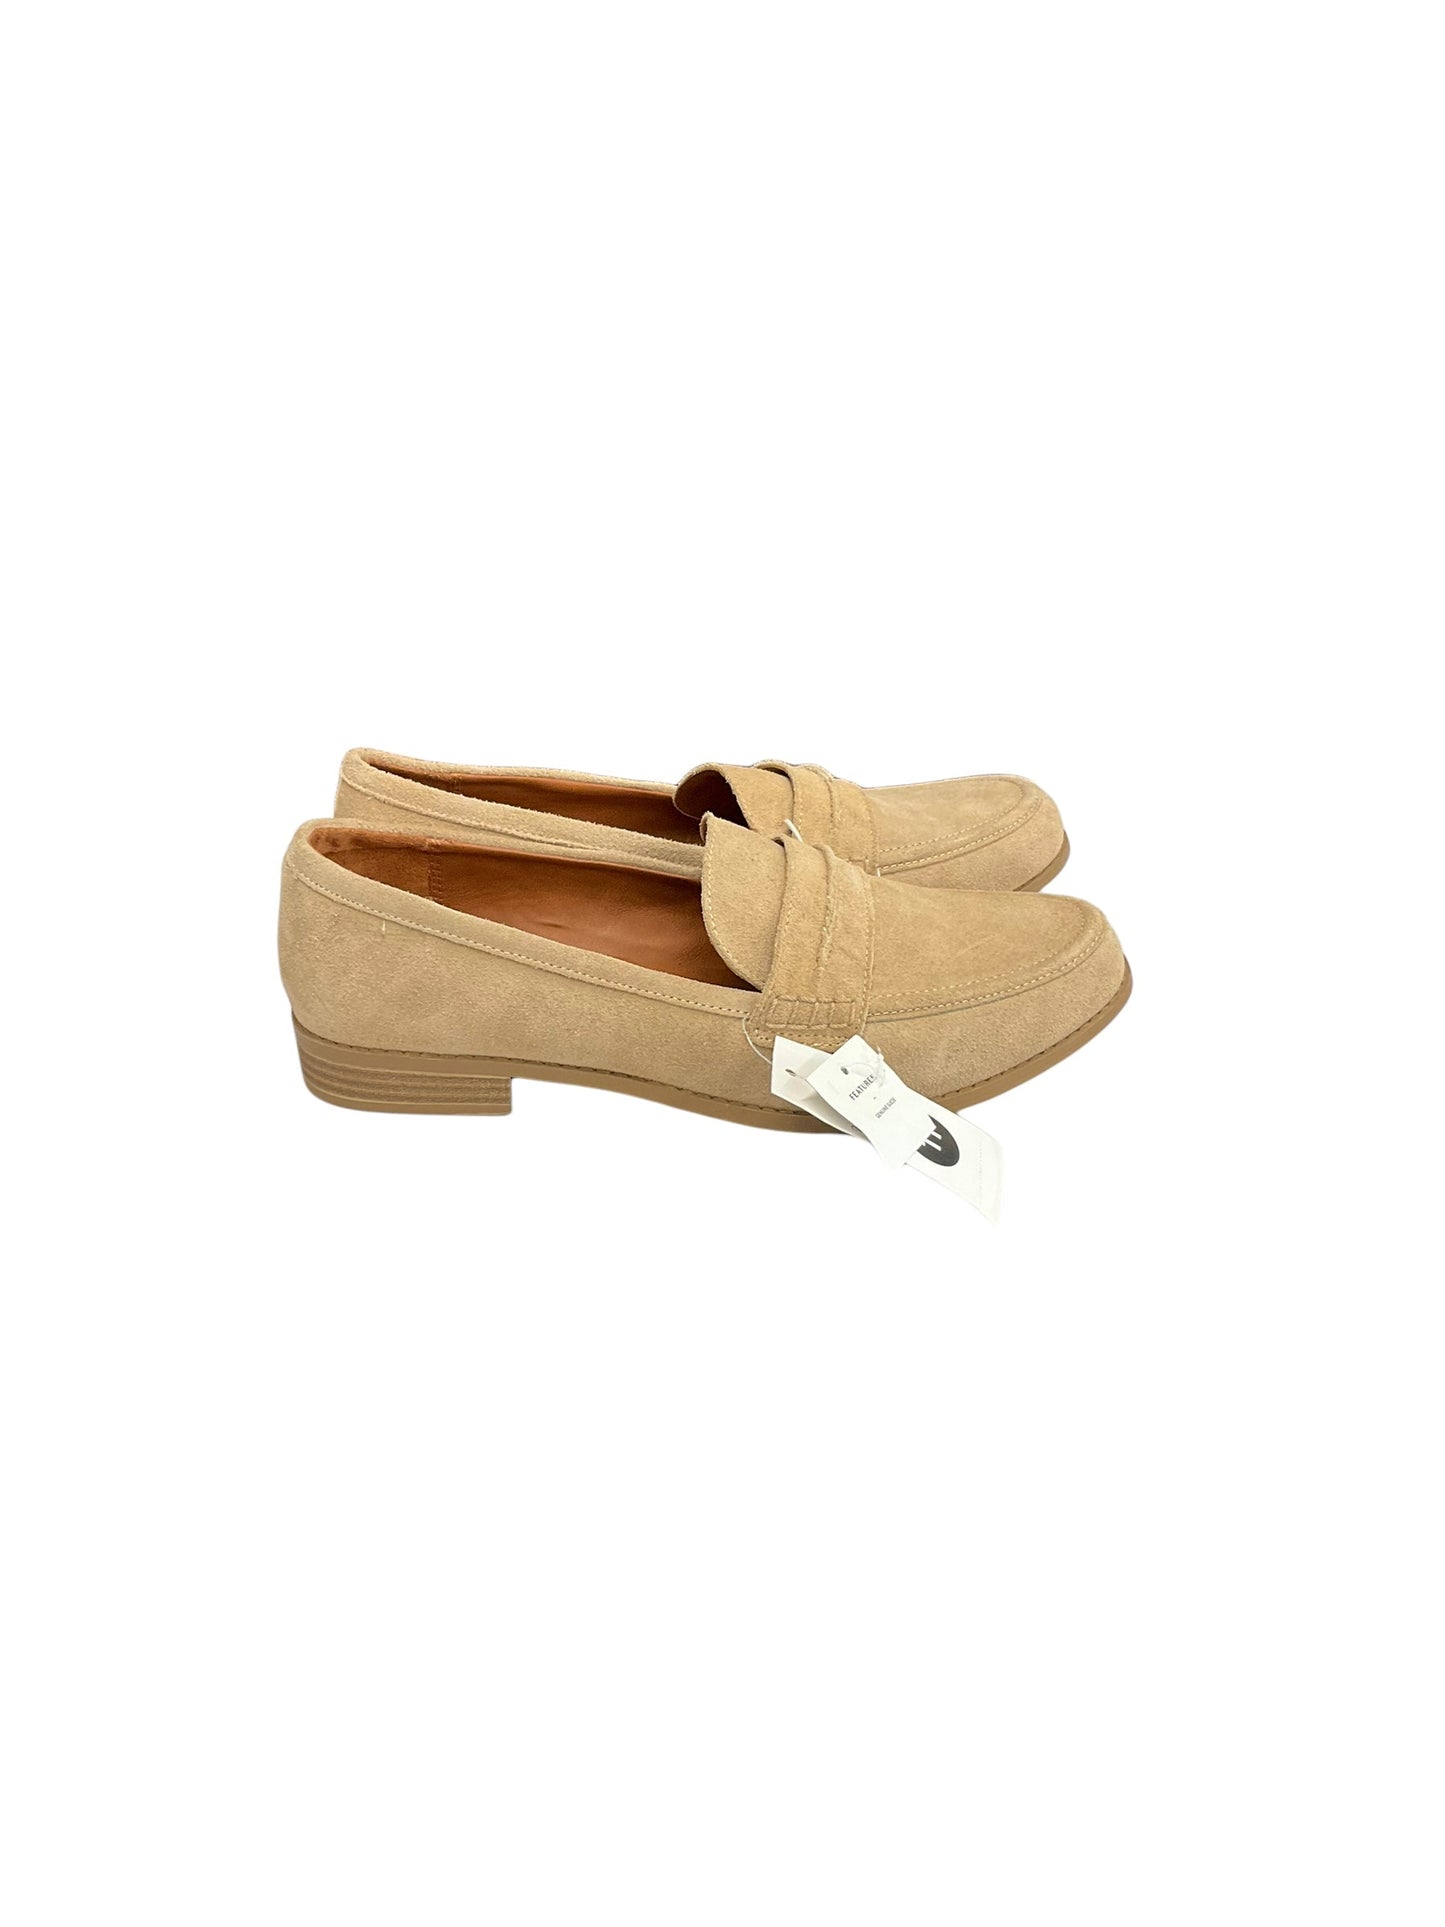 Shoes Flats By A New Day  Size: 11